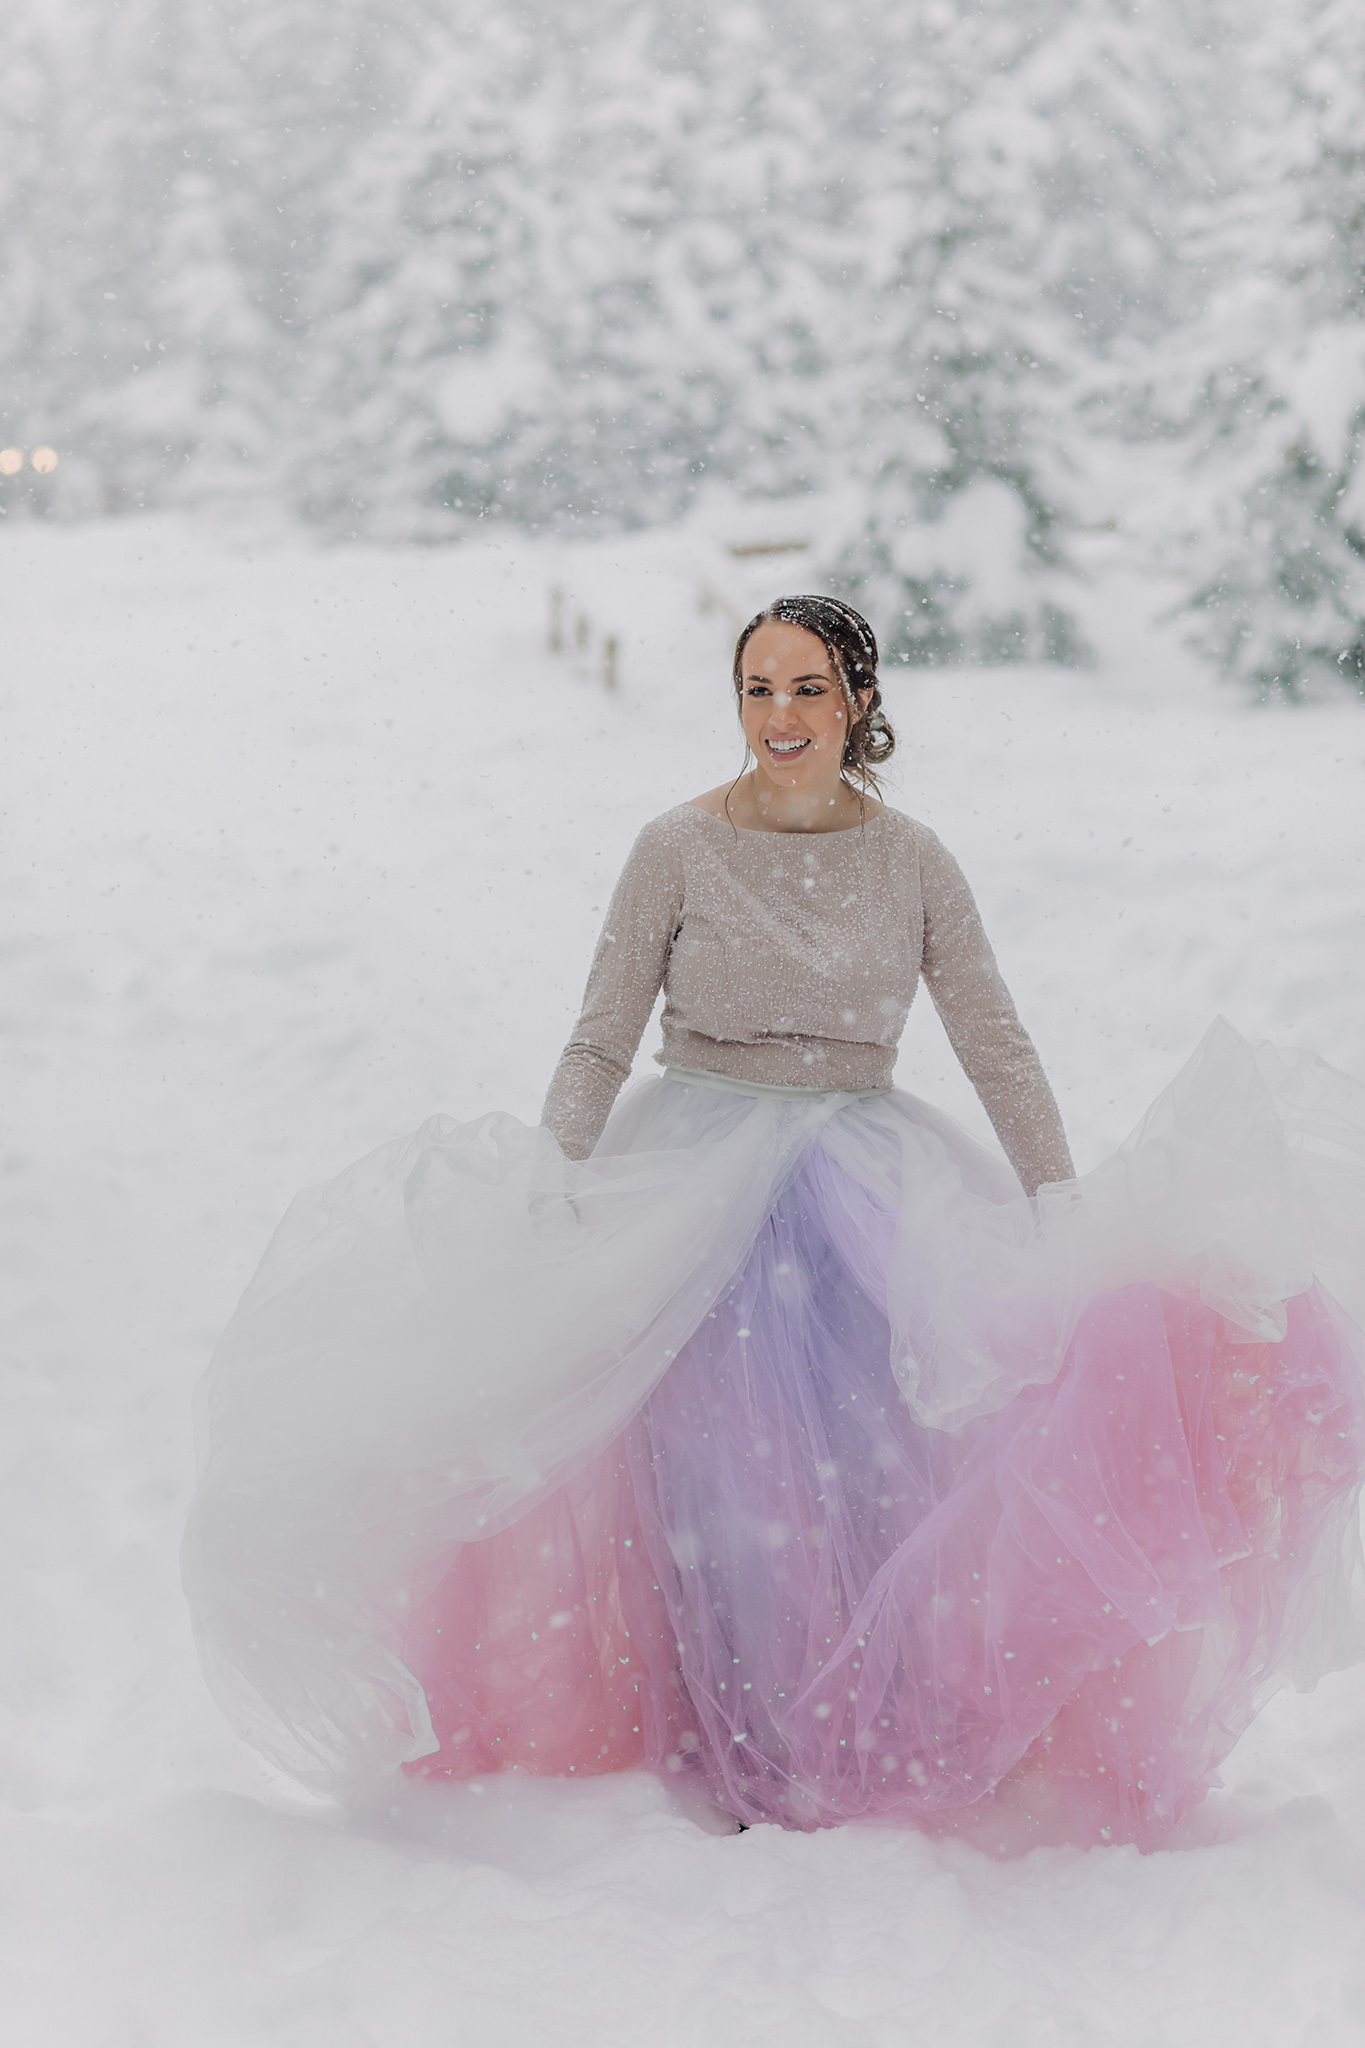 Elope in Lake Louise with a magical snowy outdoor winter wonderland wedding ceremony